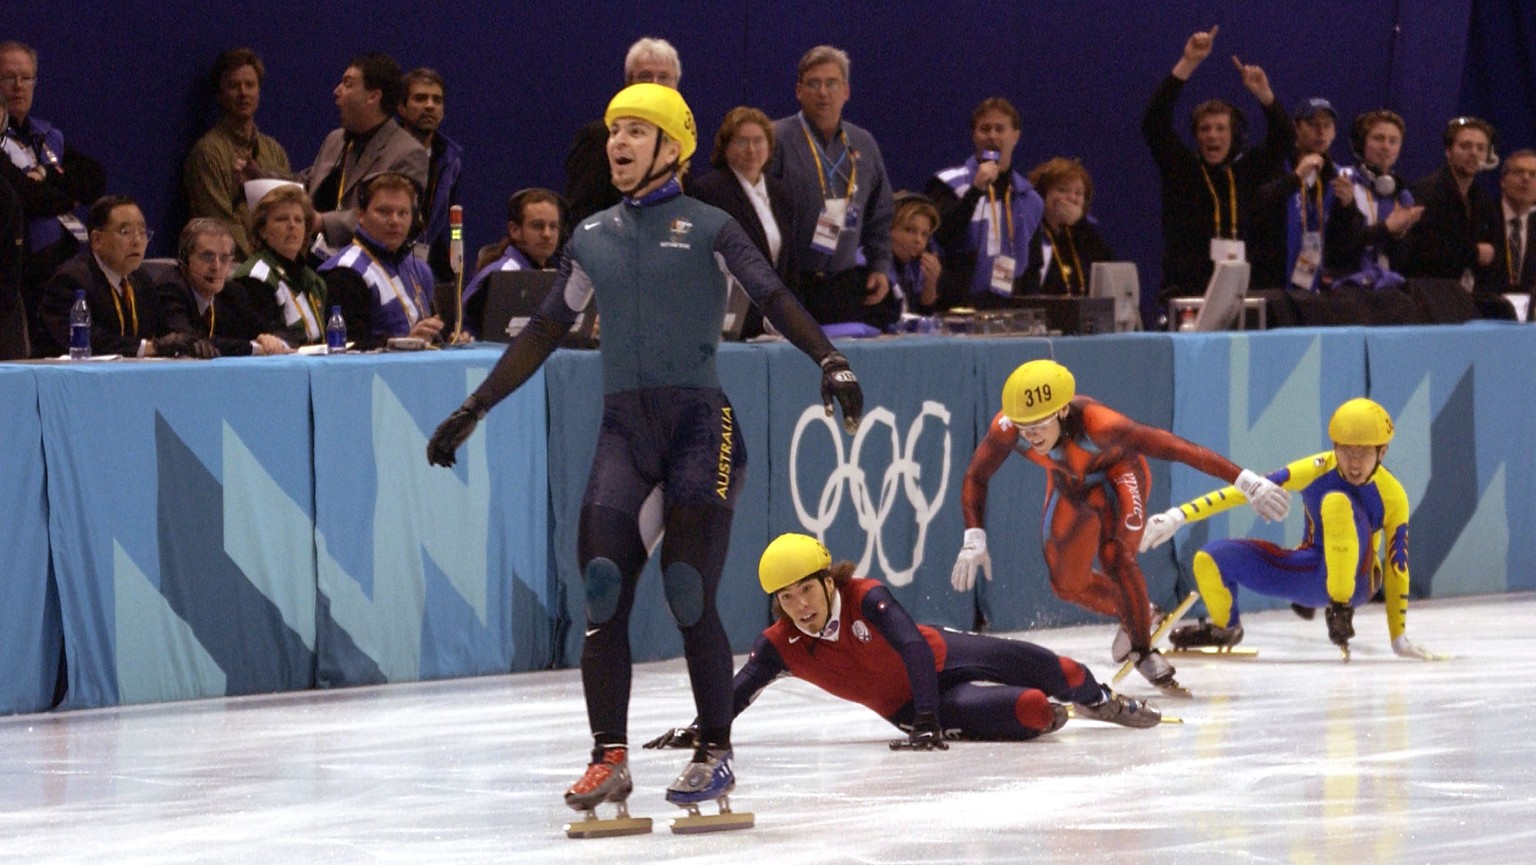 16 Feb 2002: Australia&#039;s first ever Winter Gold medal winner Steven Bradbury crosses the line while America&#039;s Apolo Anton Ohno scrambles for the line to claim second place after the men&#039 ...